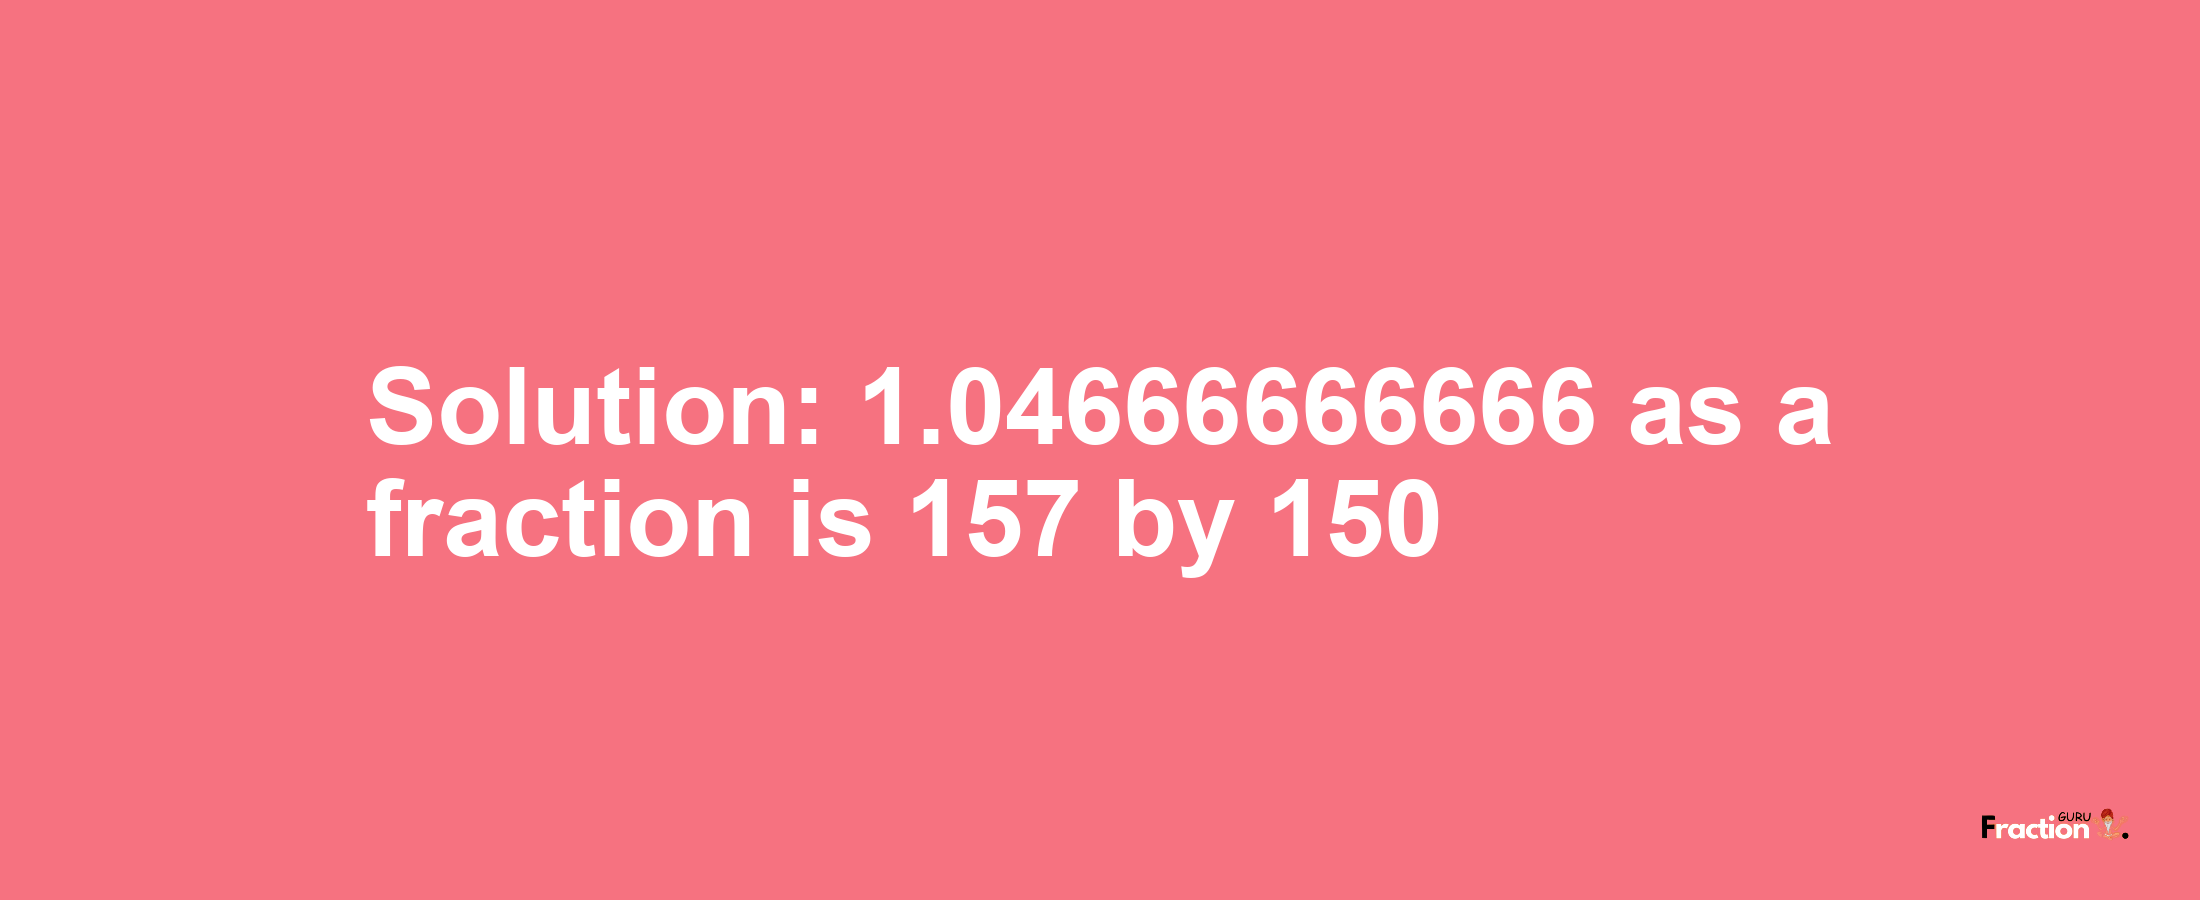 Solution:1.04666666666 as a fraction is 157/150